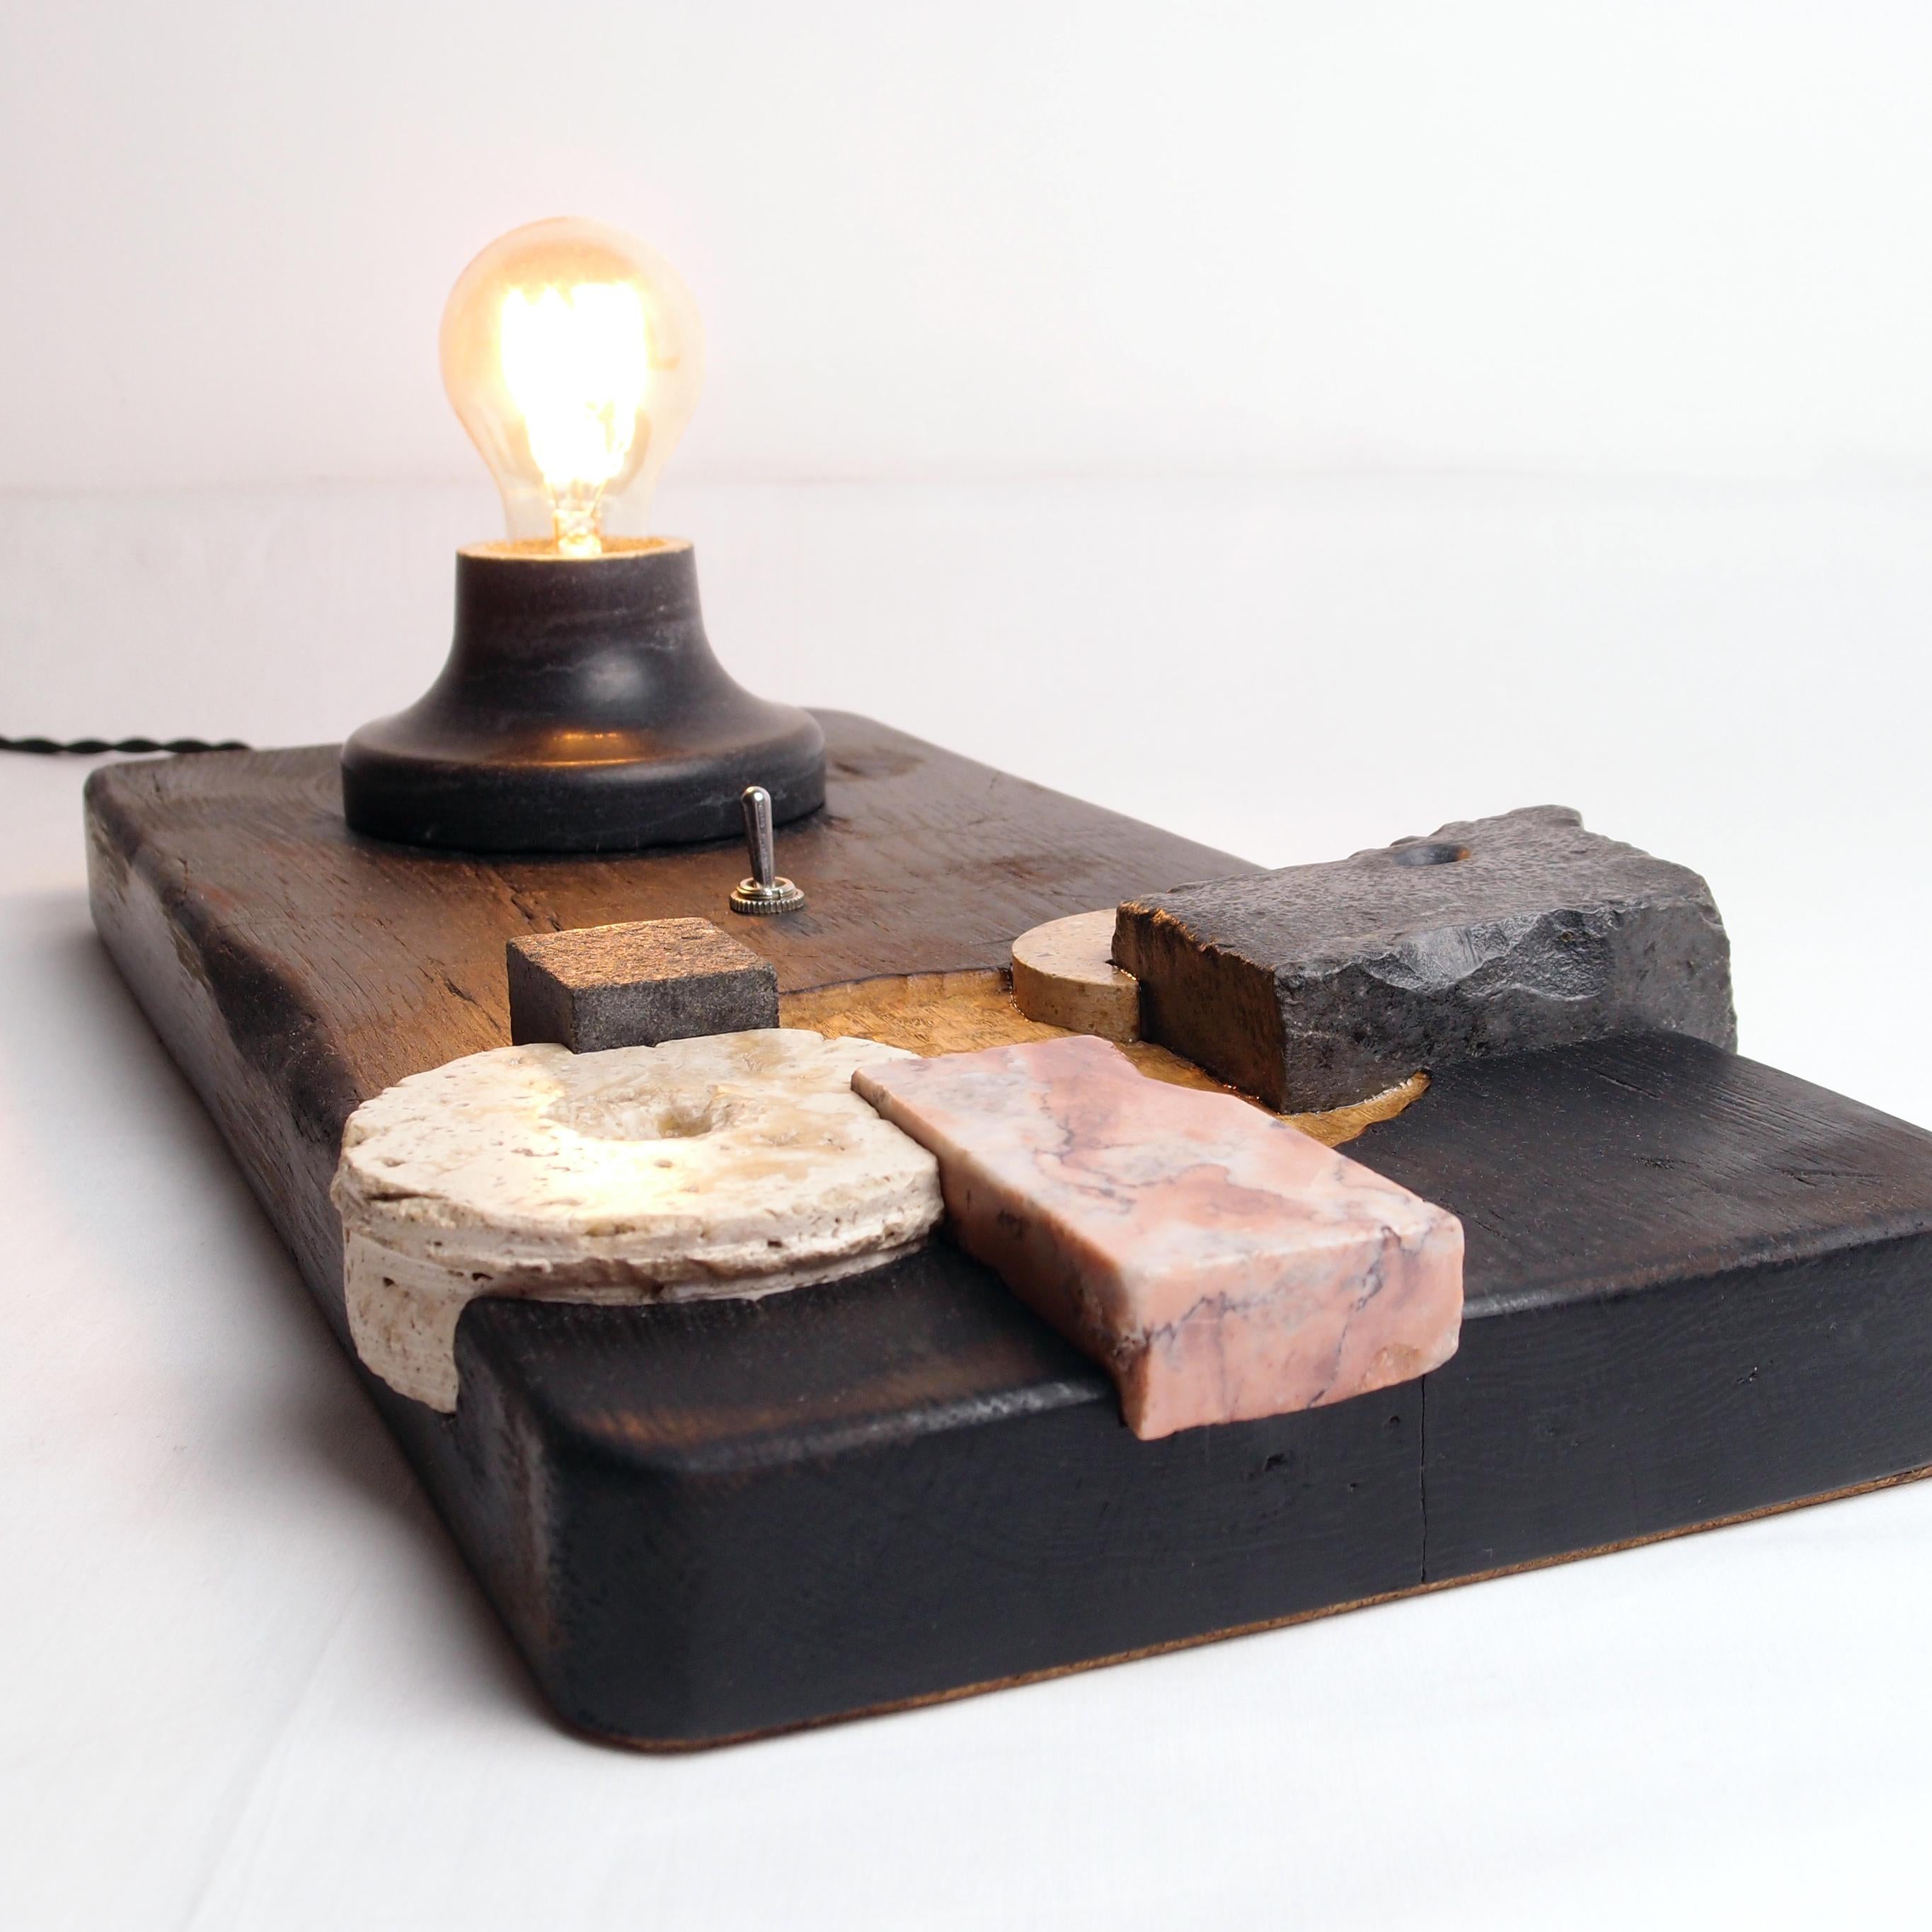 Hungarian Puzzle, Sculptured Lighting, Table Lamp from Reclaimed Burned Wood and Stone For Sale